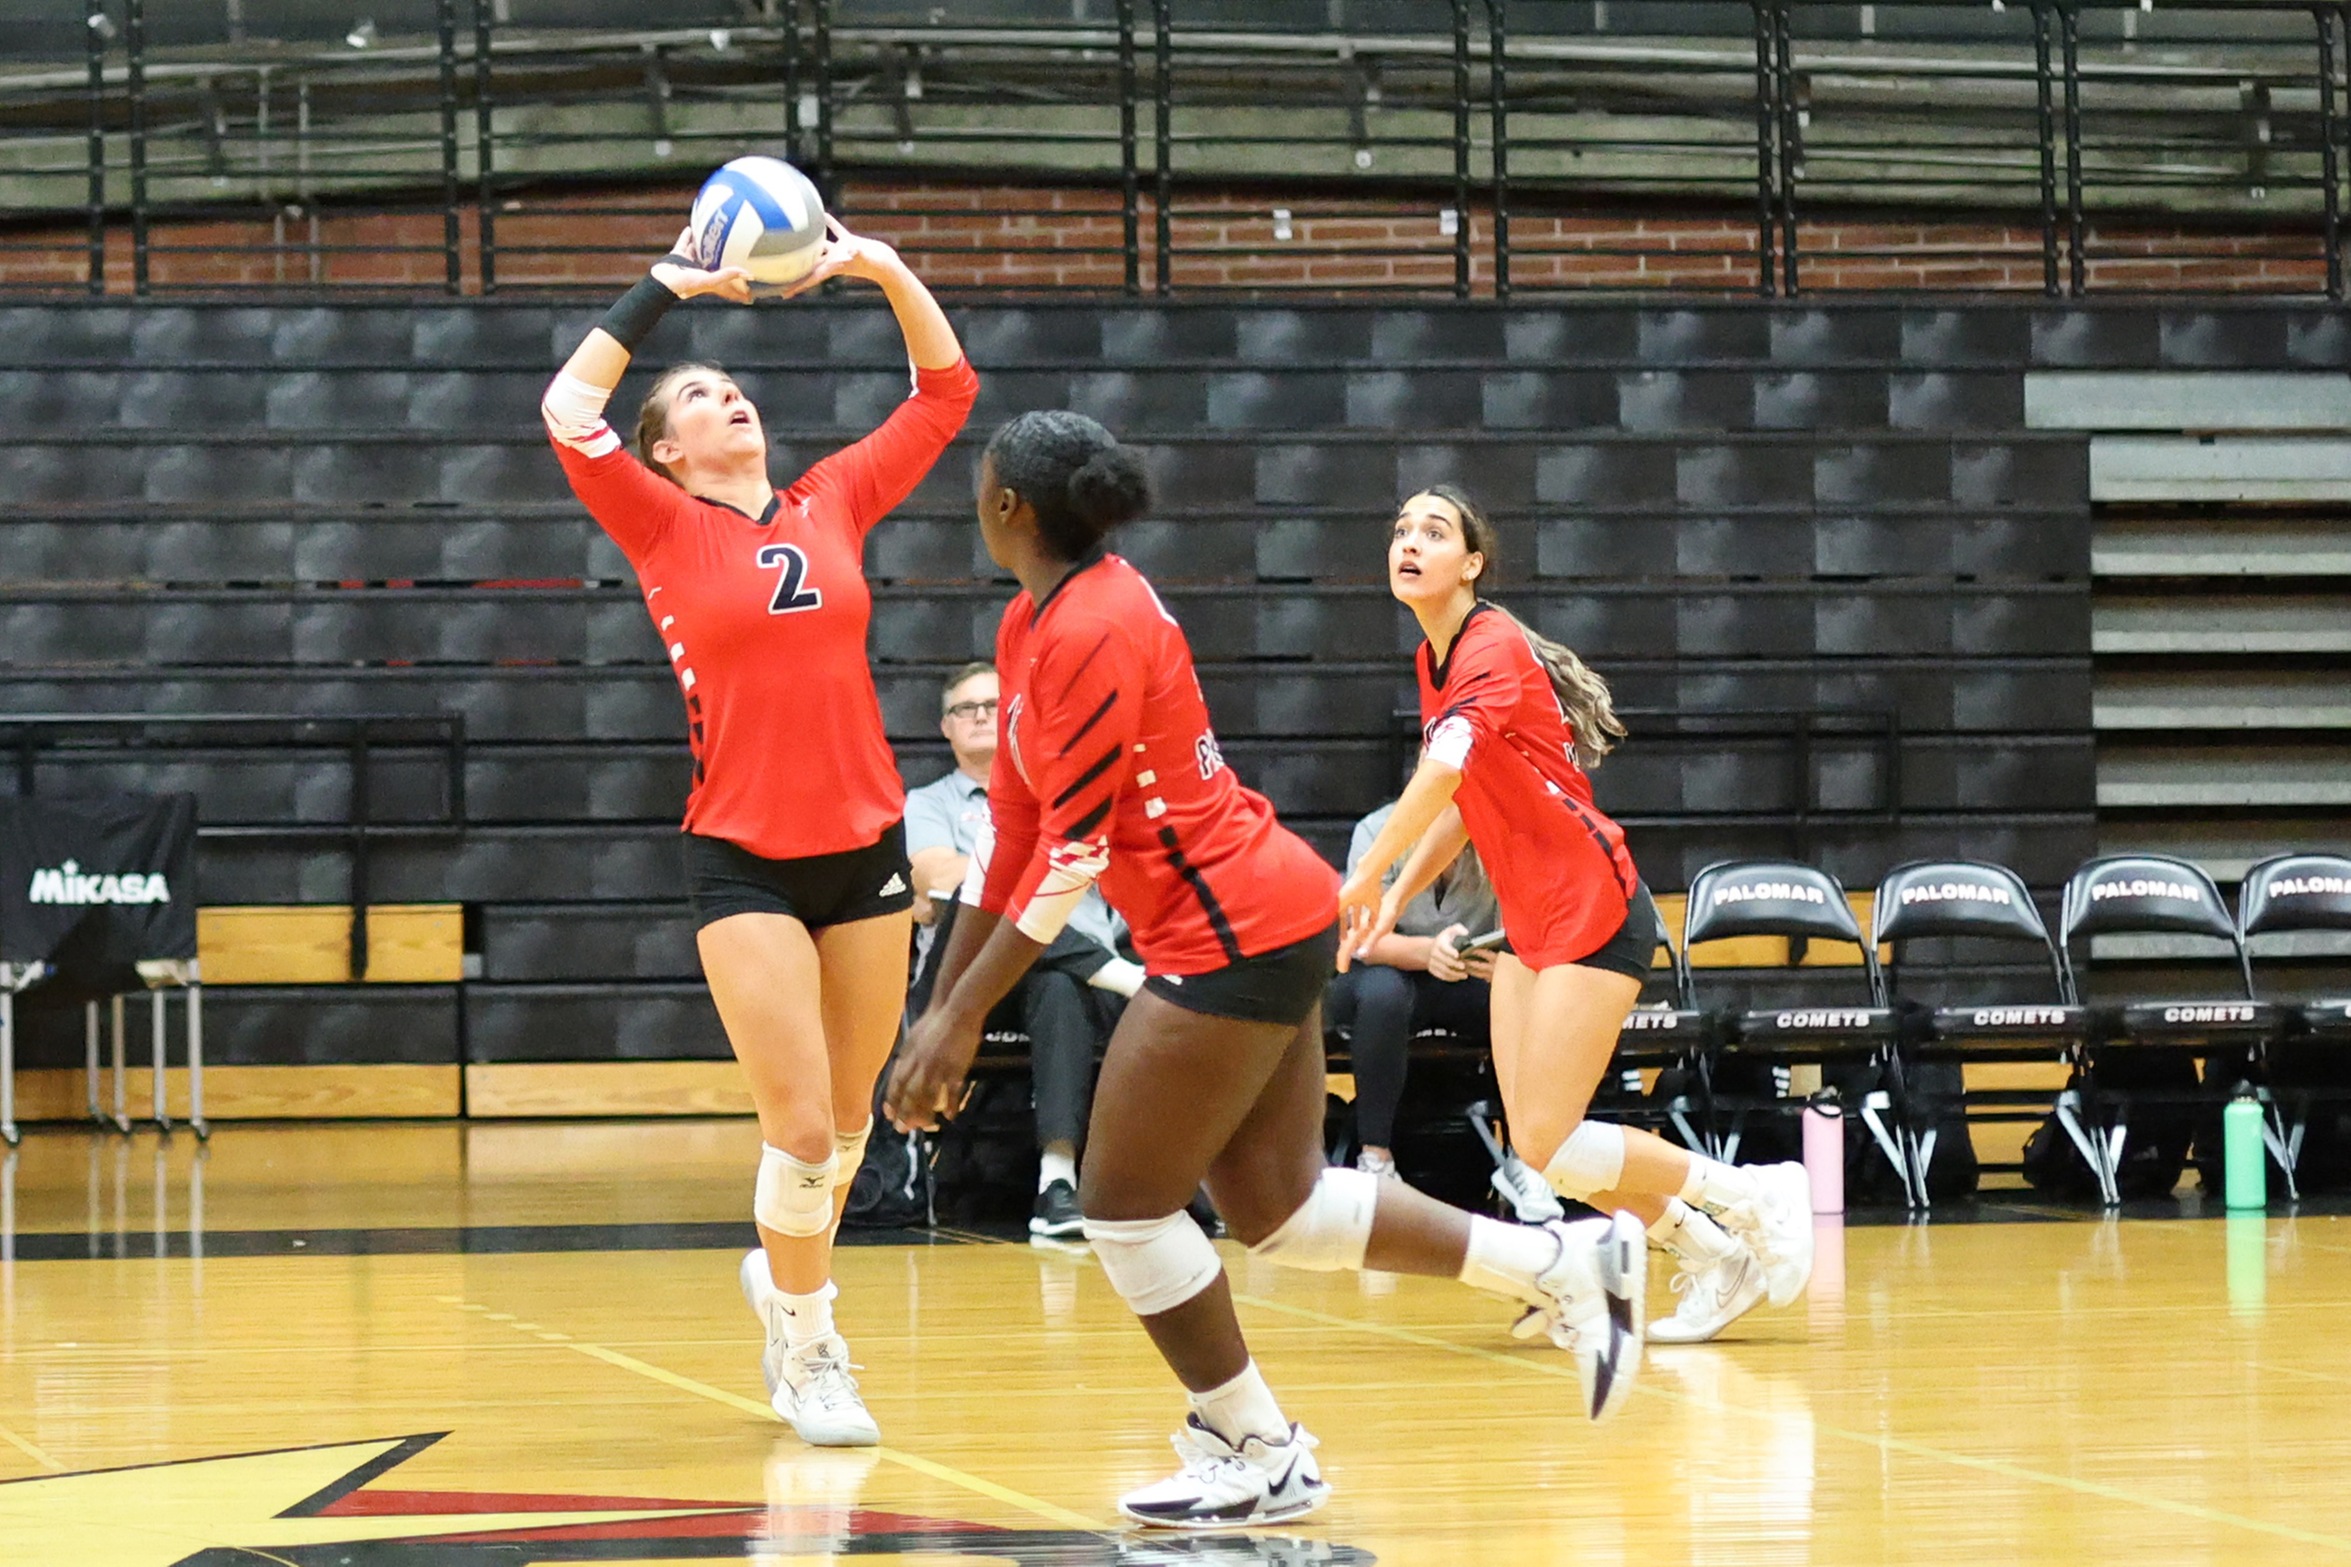 Mayara Swillens finished the night with 26 assists, five aces and four blocks. Photo by Hugh Cox.